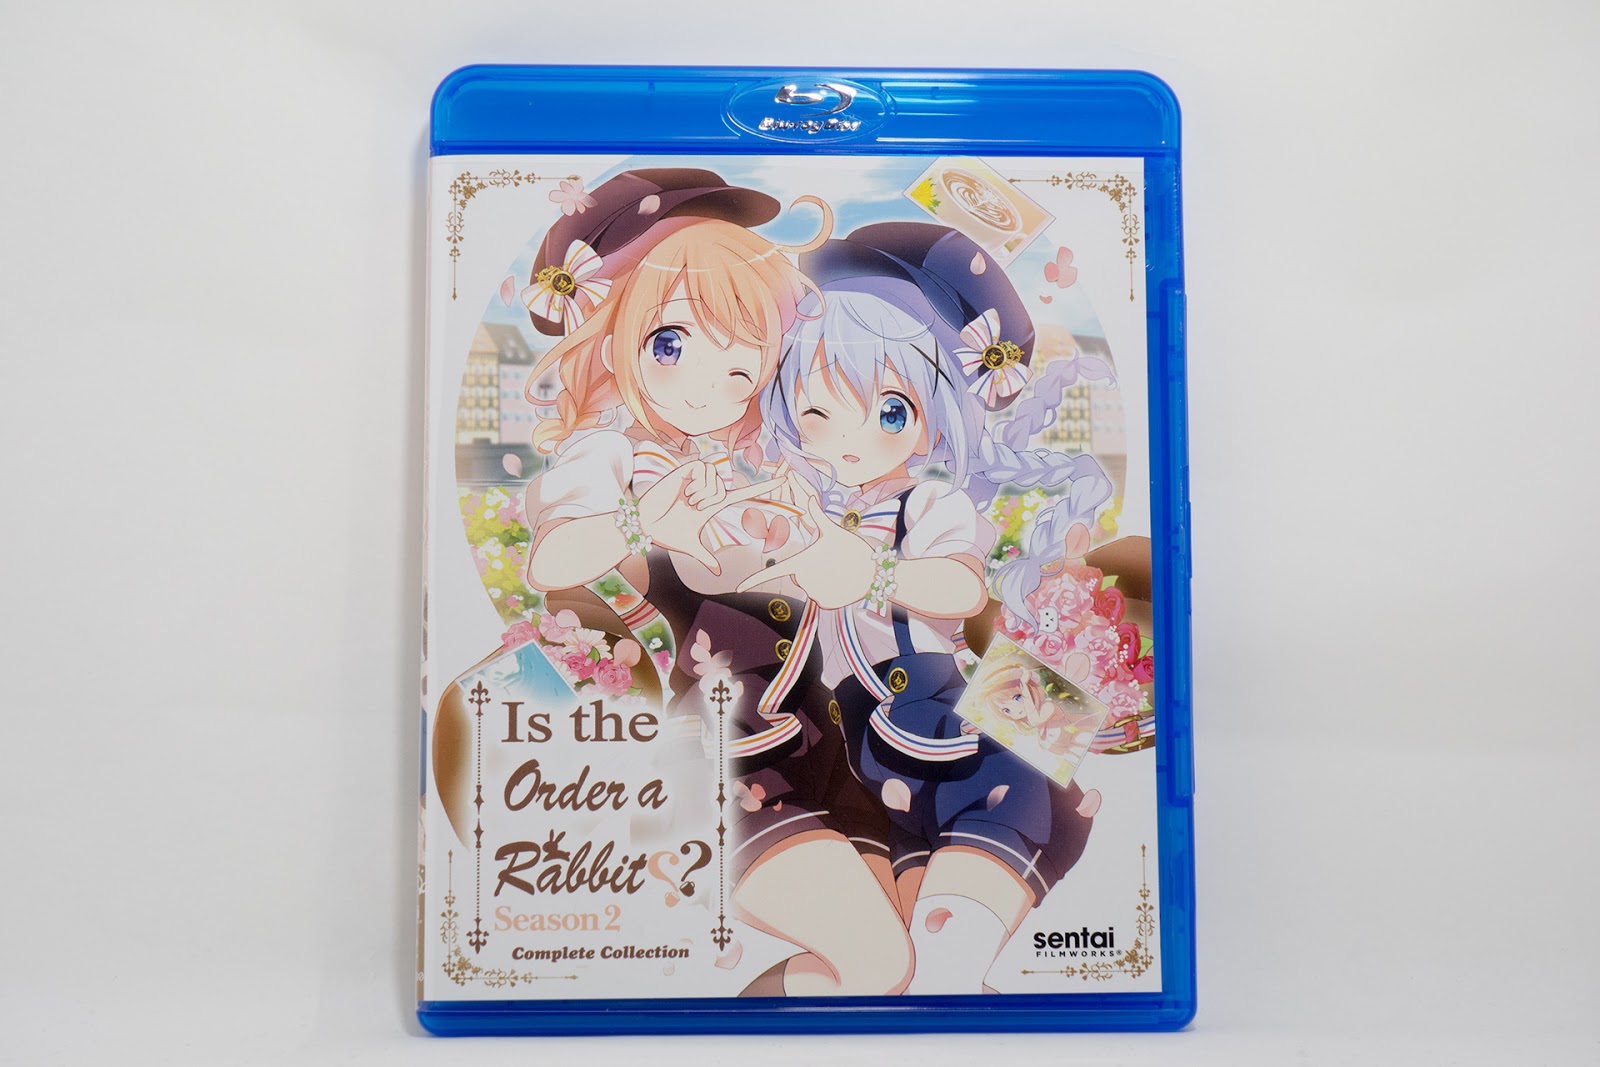  Your order is a rabbit? Is the order a rabbit [Blu-ray]  [Import] : ご注文はうさぎですか?, ご注文はうさぎですか?, 第1期 全12話: DVD